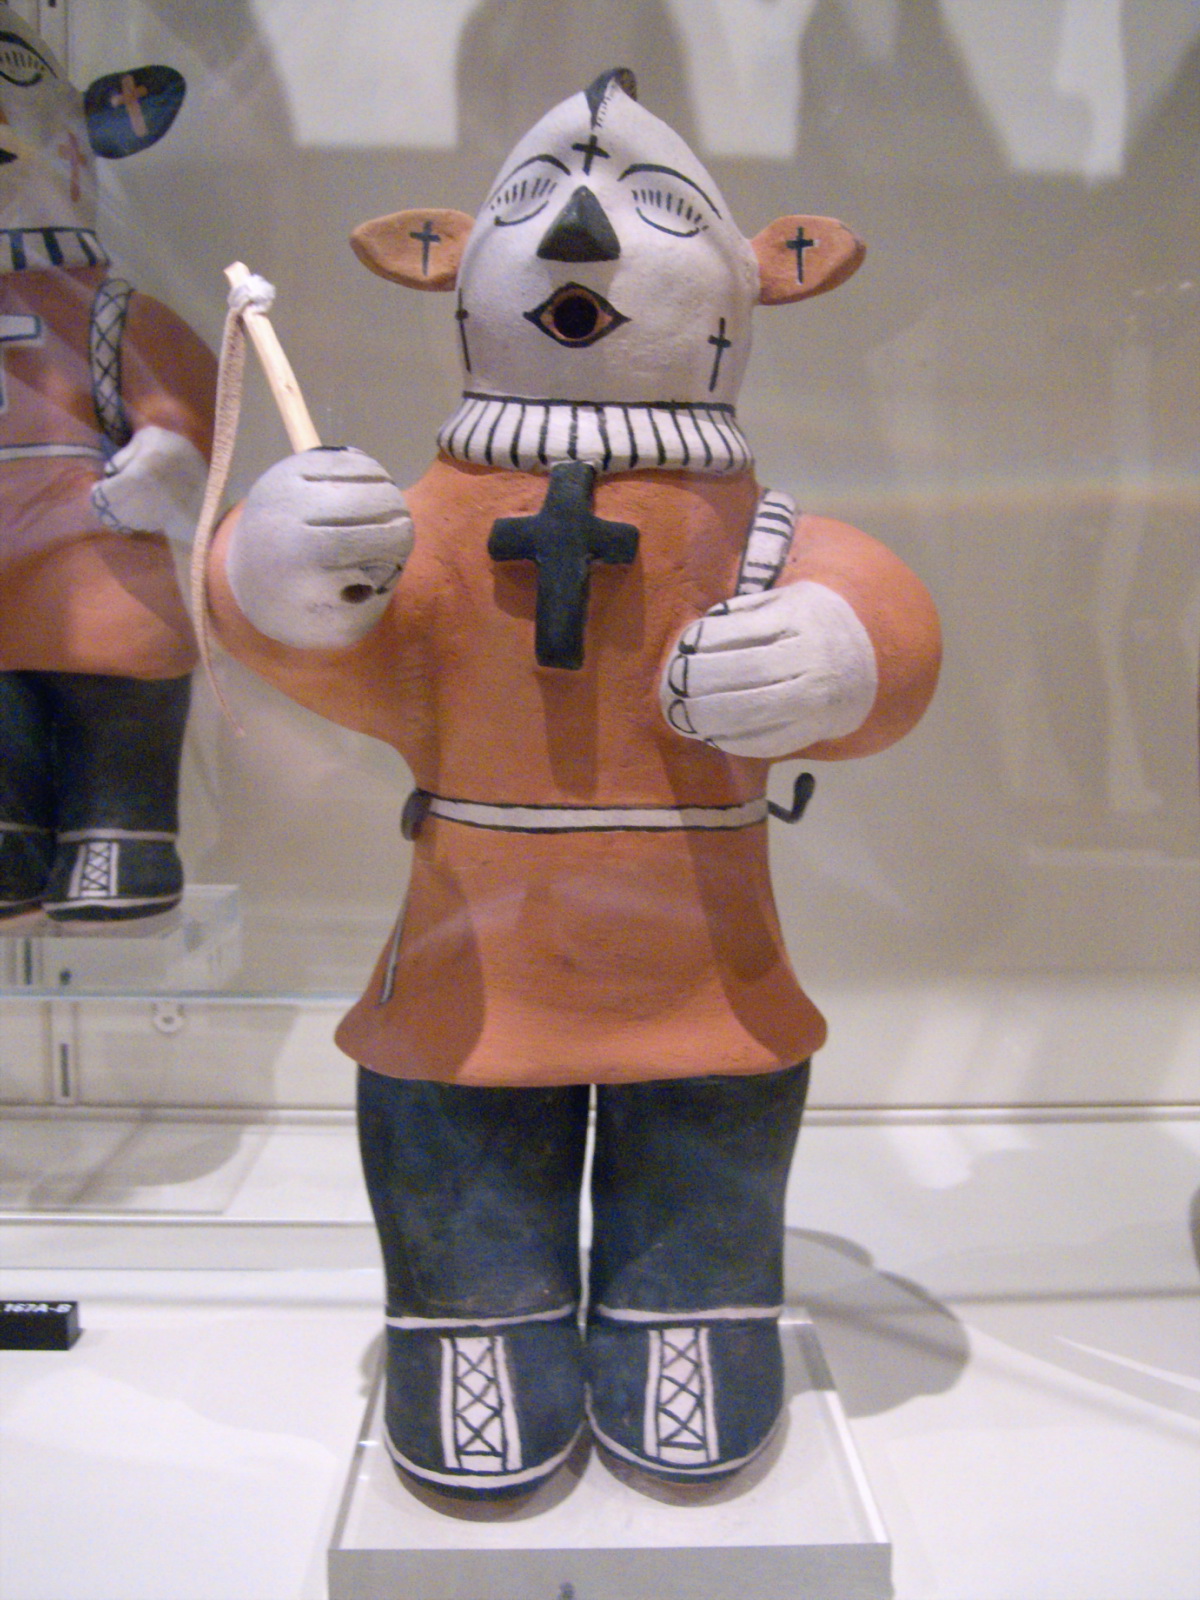 several ceramic figurines including a person wearing an orange outfit